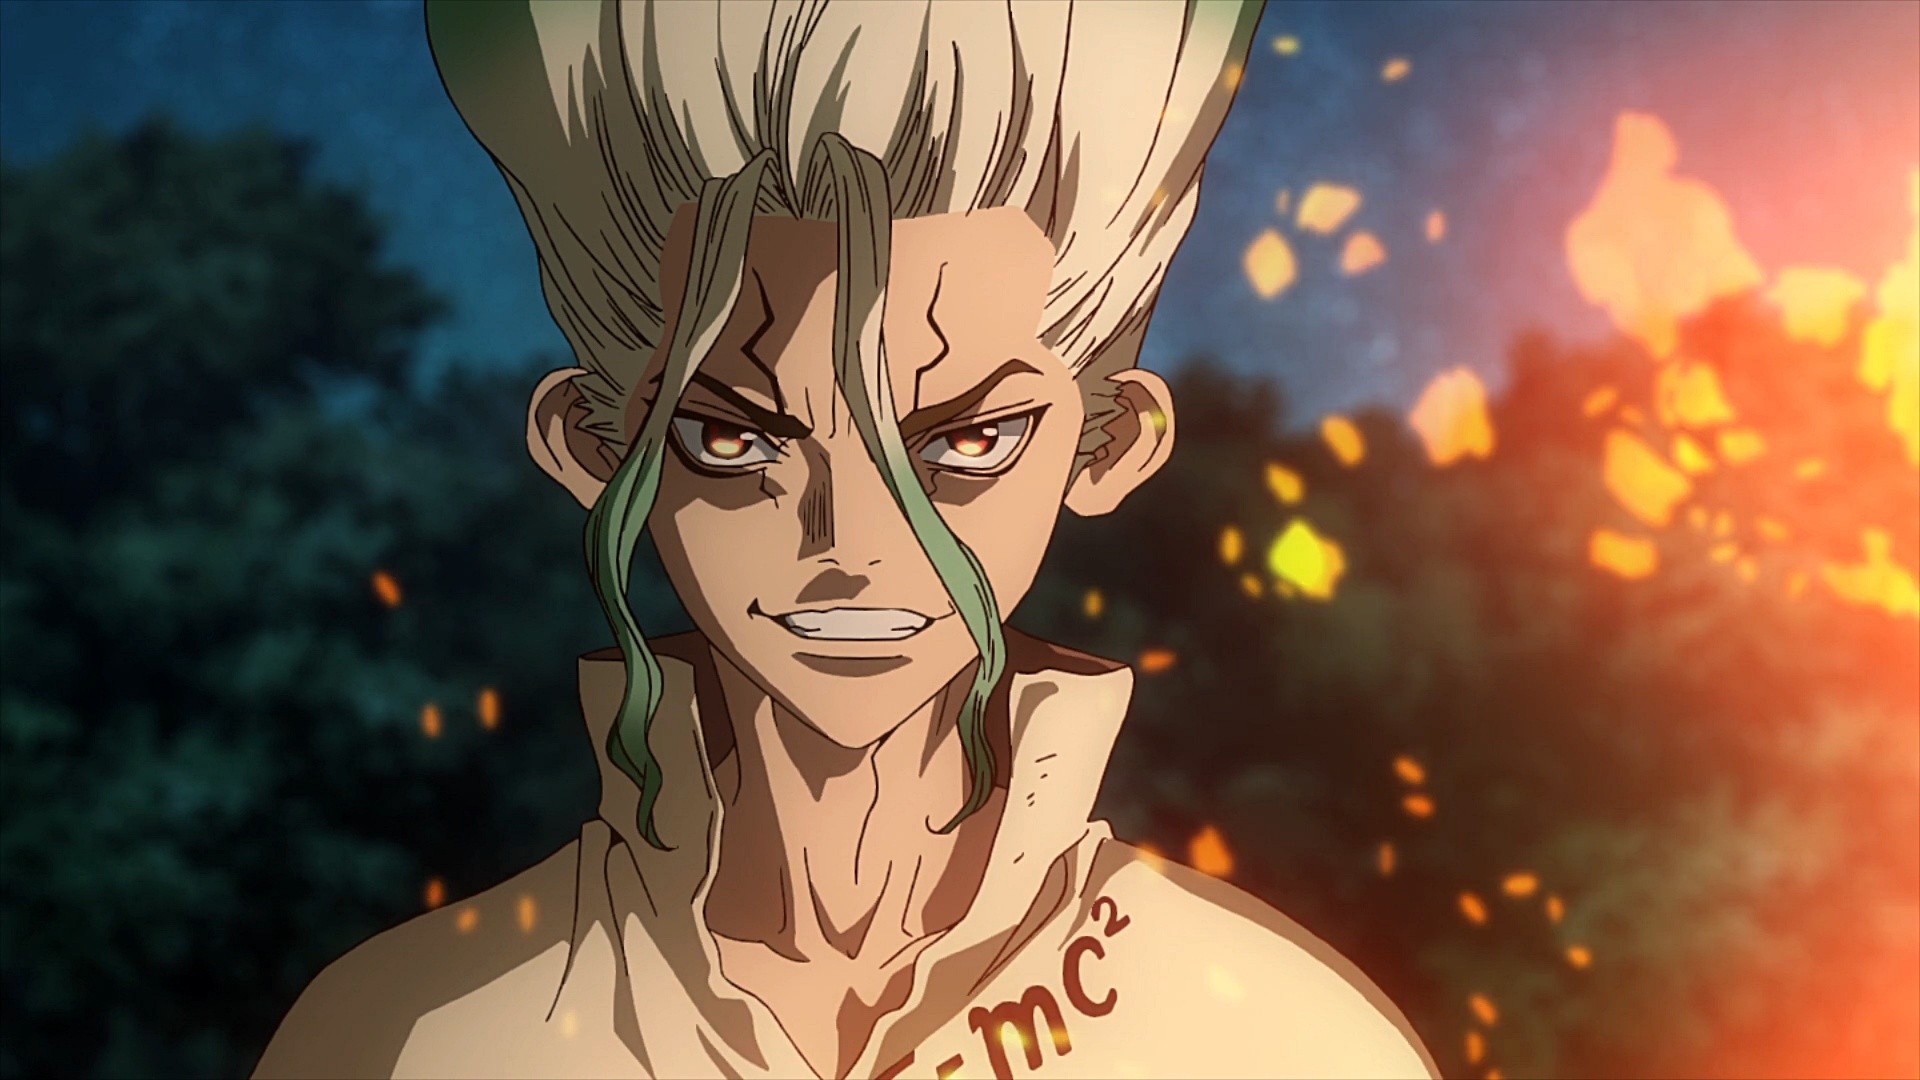 REVIEW: Dr. STONE: Ryusui Brings Back the Spark